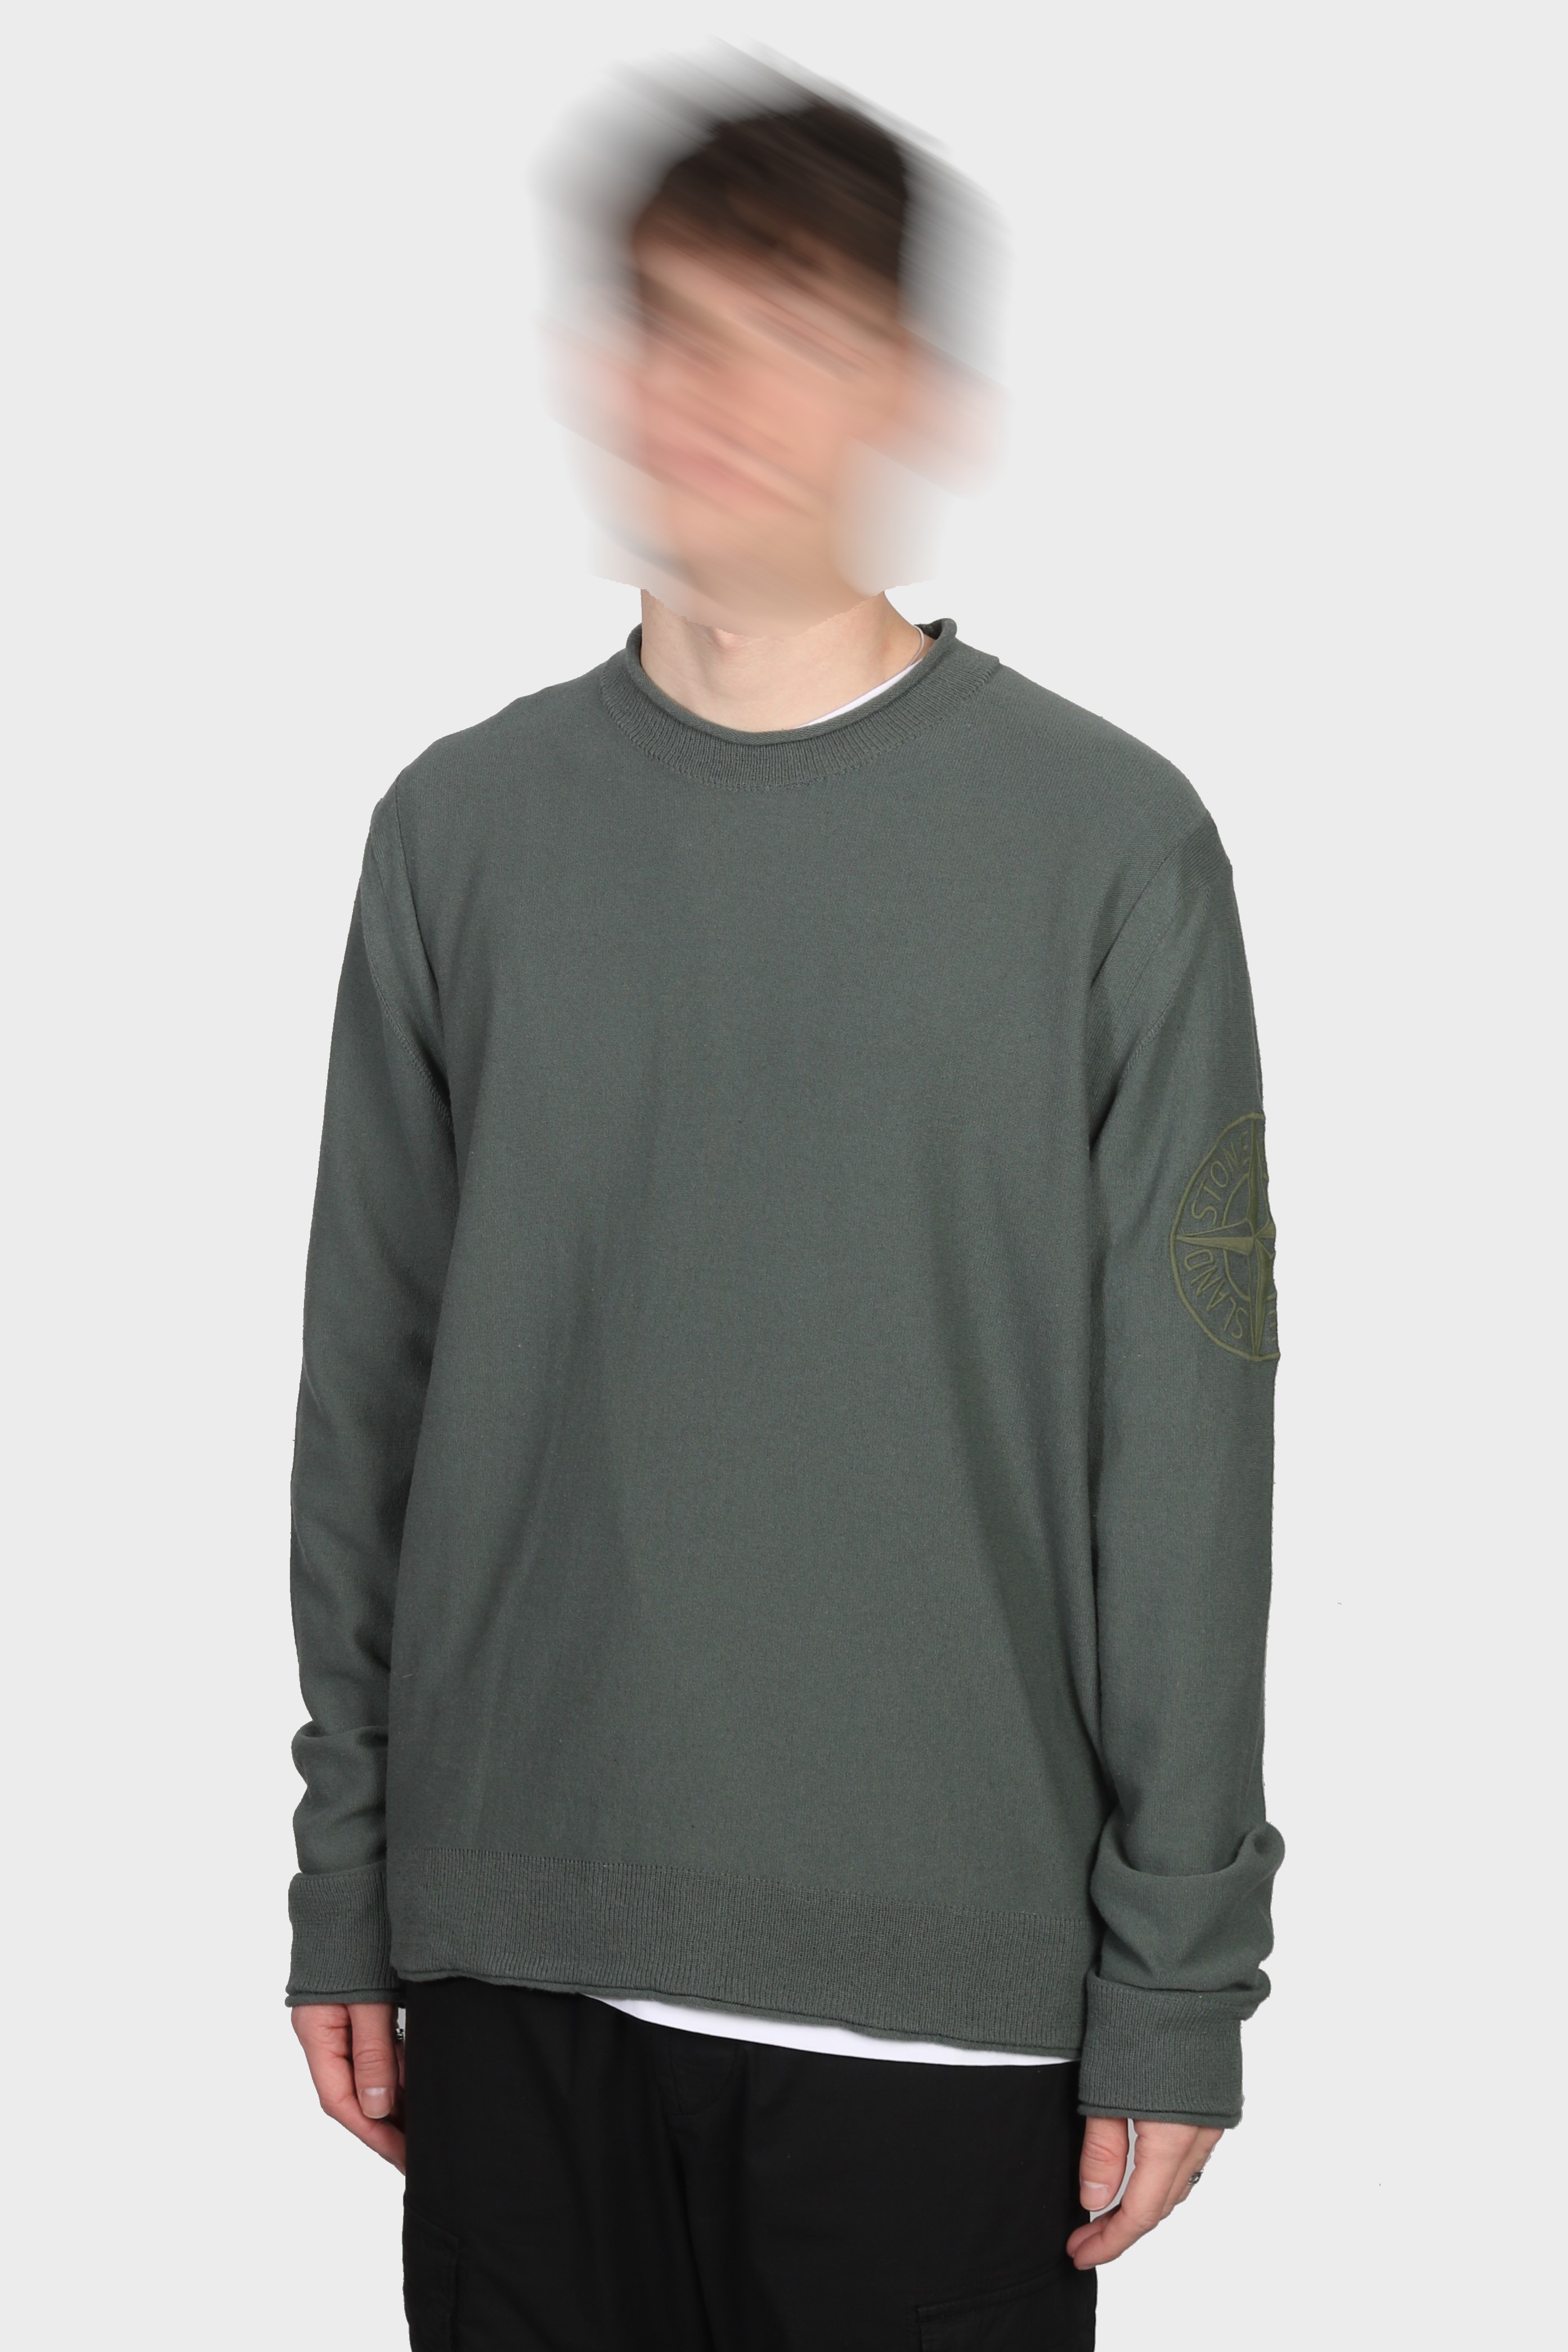 STONE ISLAND Cotton Knit Pullover in Green 3XL